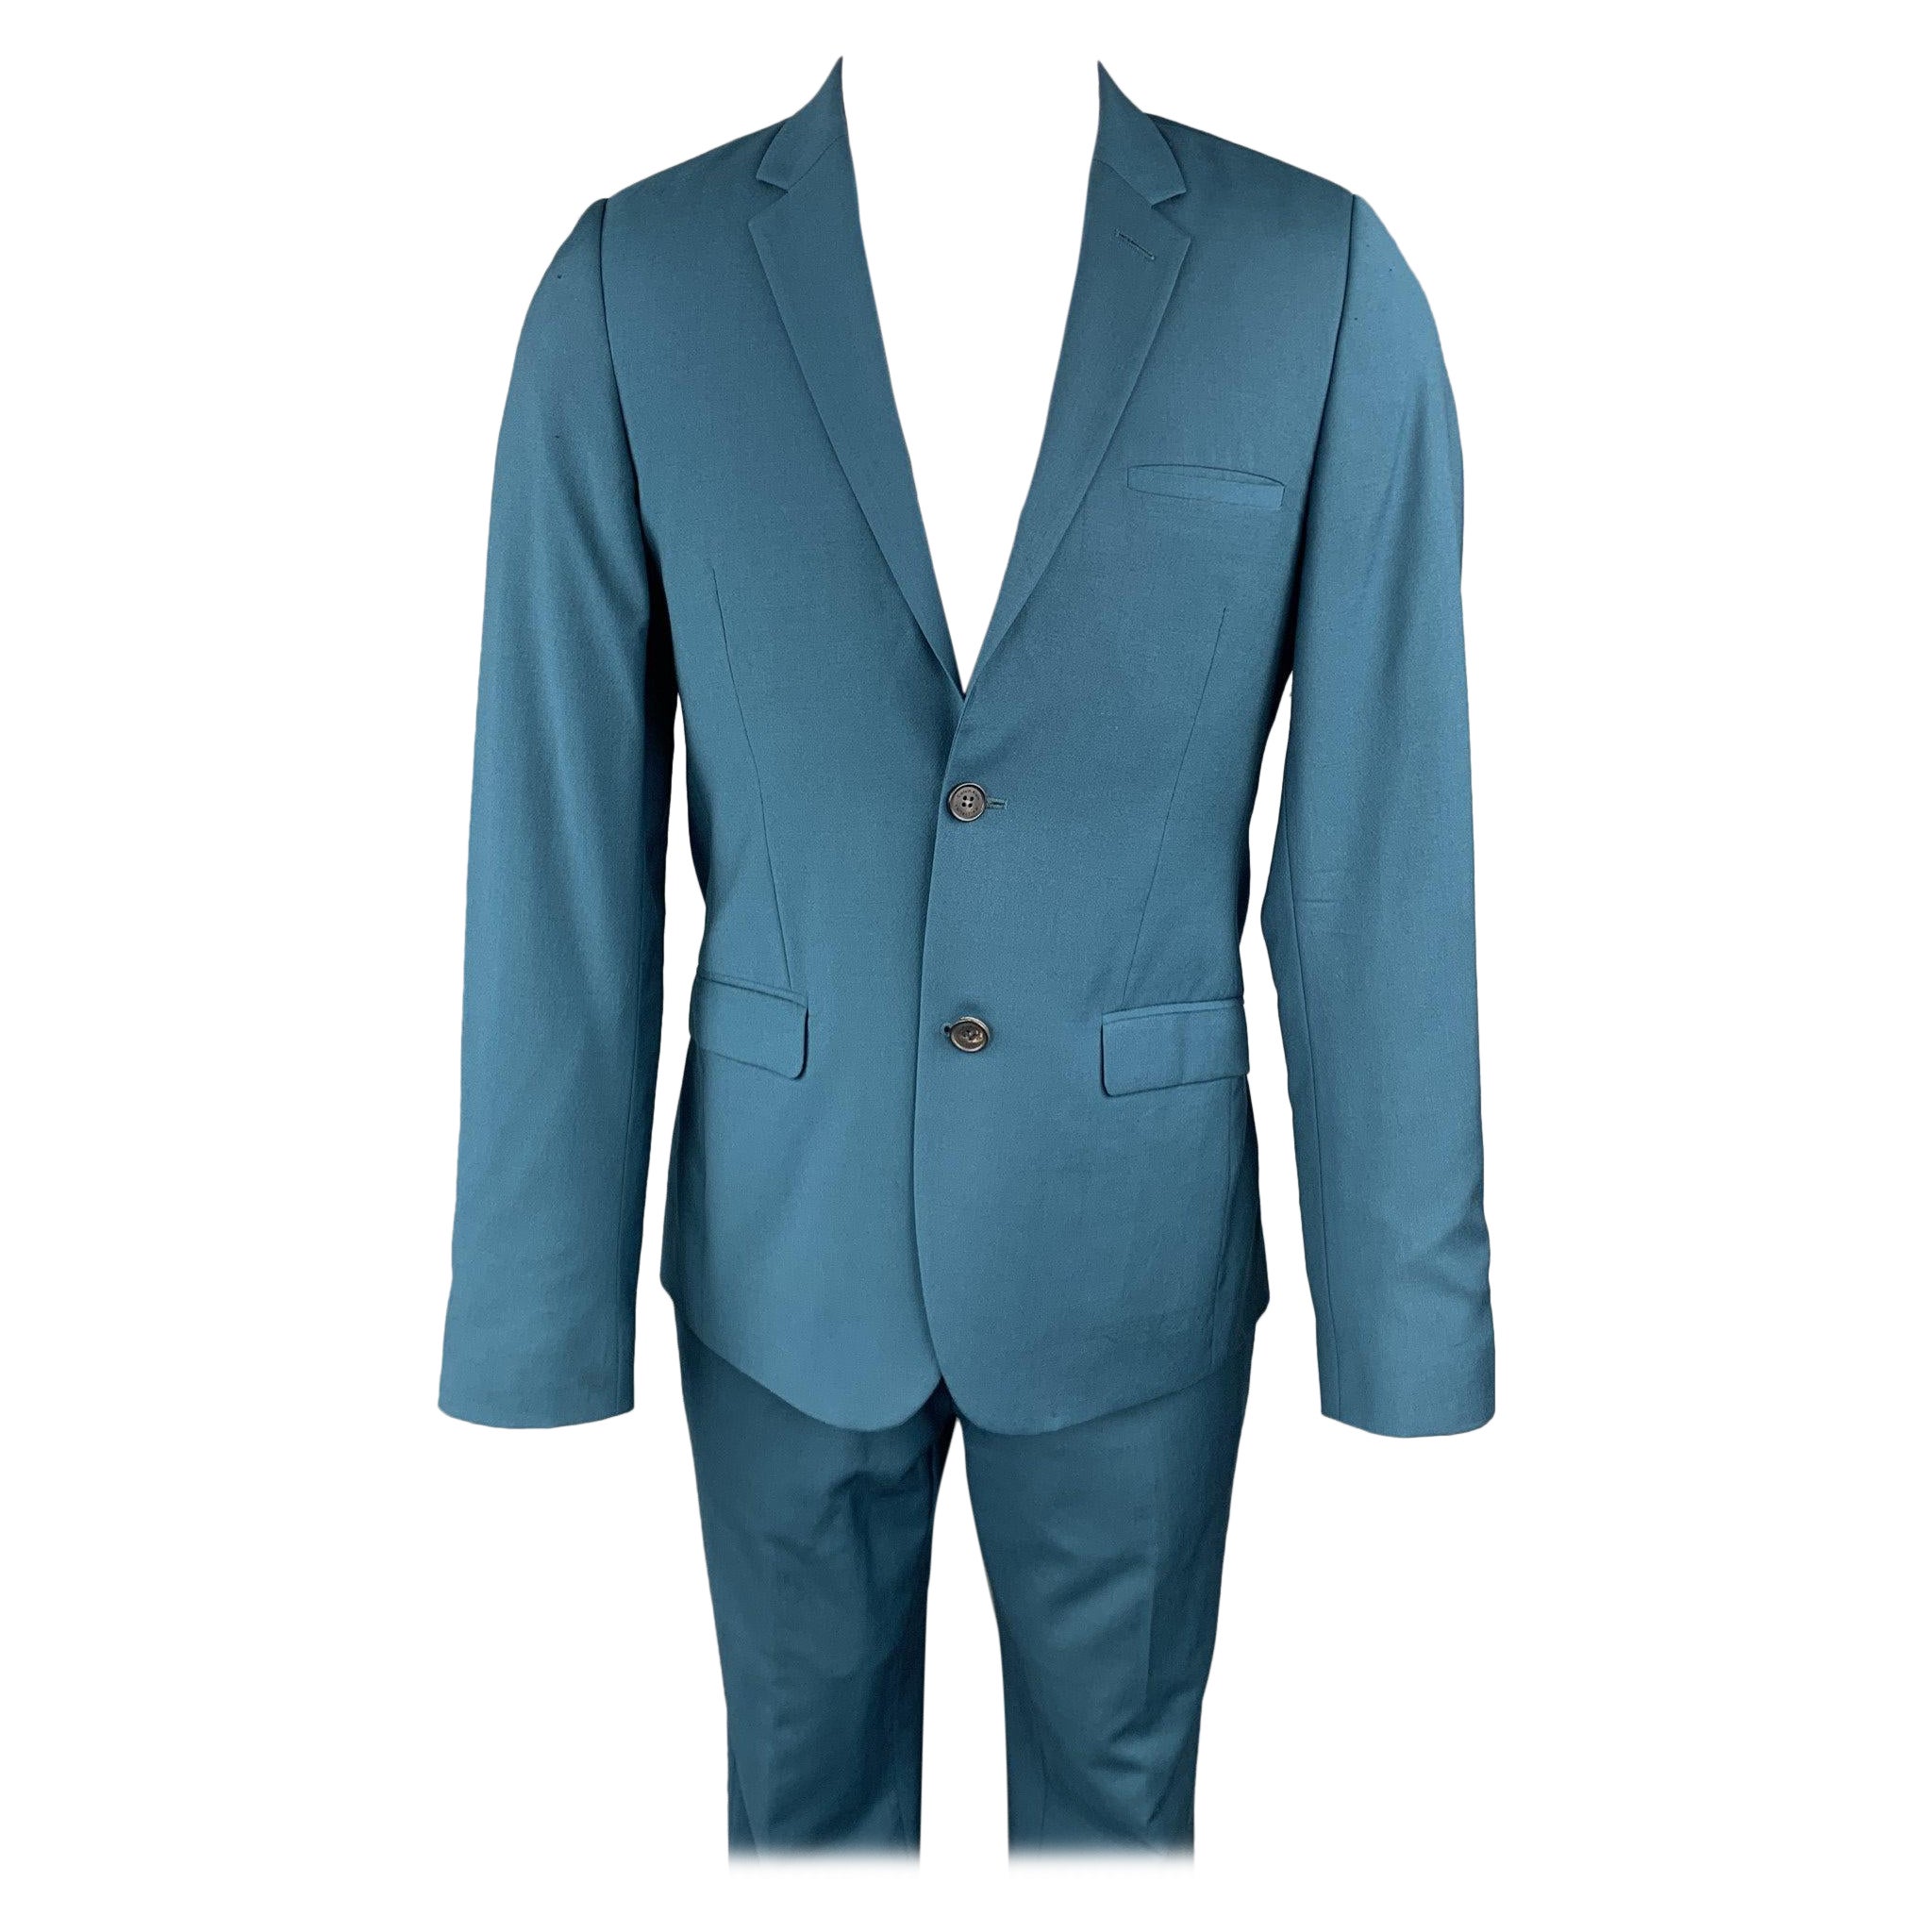 CALVIN KLEIN COLLECTION Size 36 Wool Notch Lapel Teal Suit For Sale